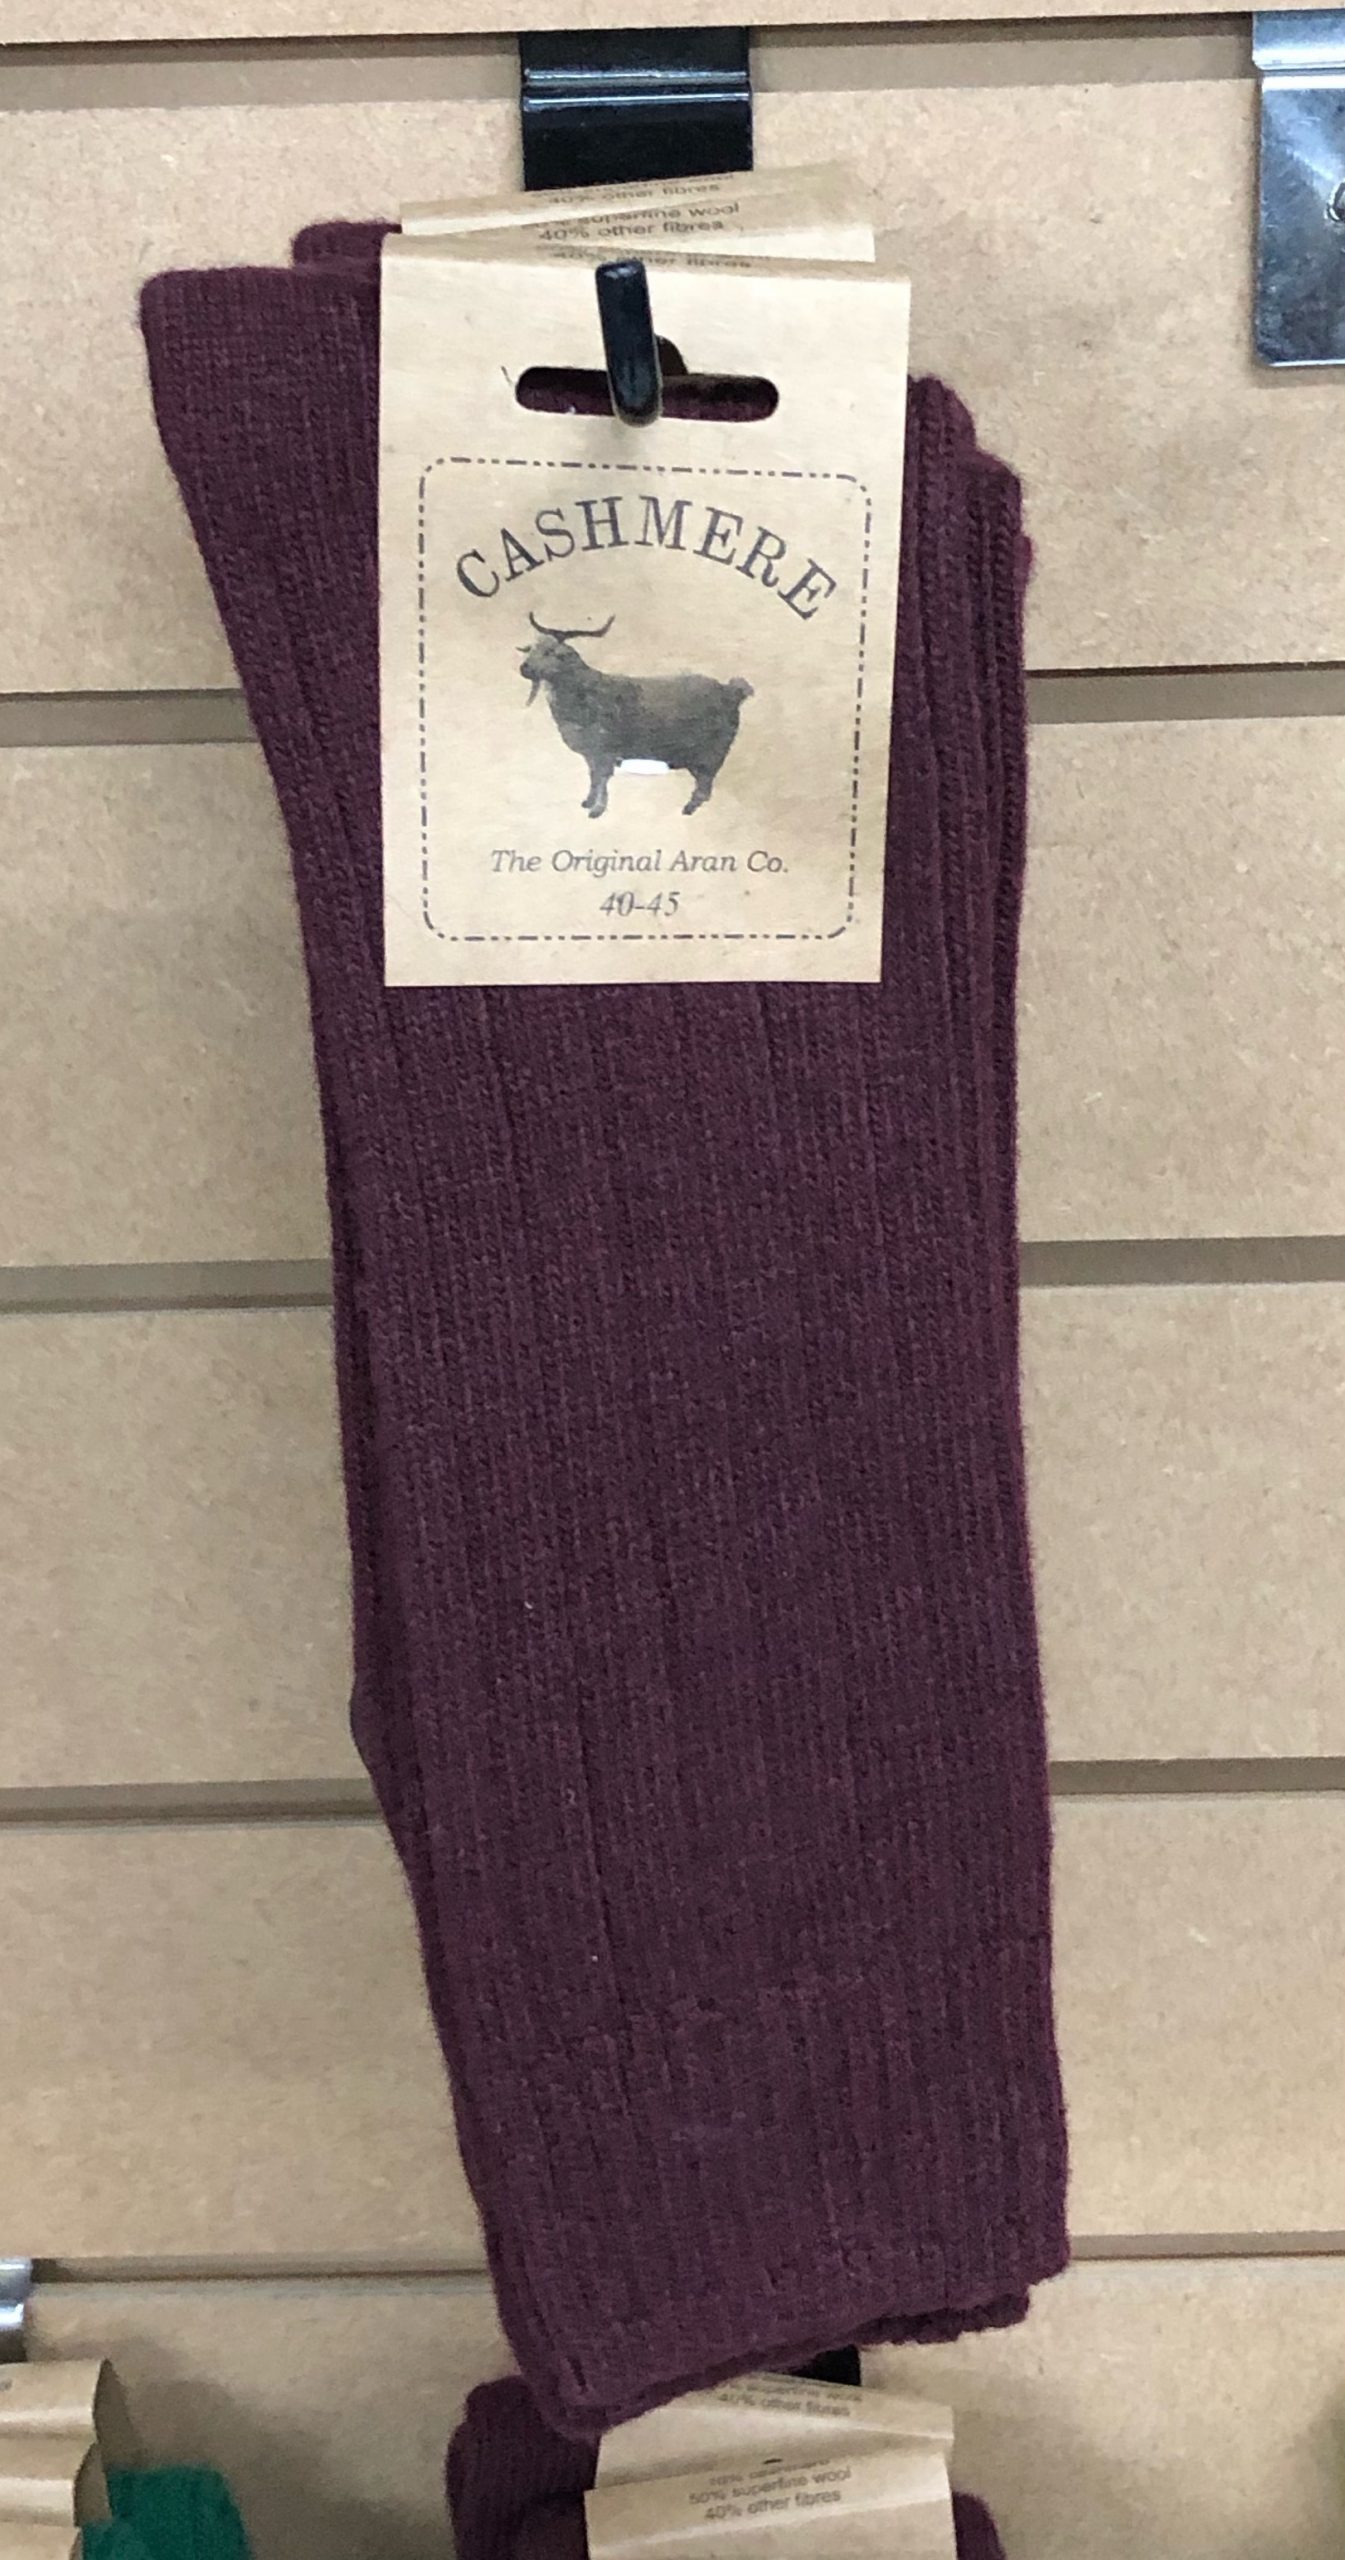 Cashmere and Wool Wine Socks in Size 7-11